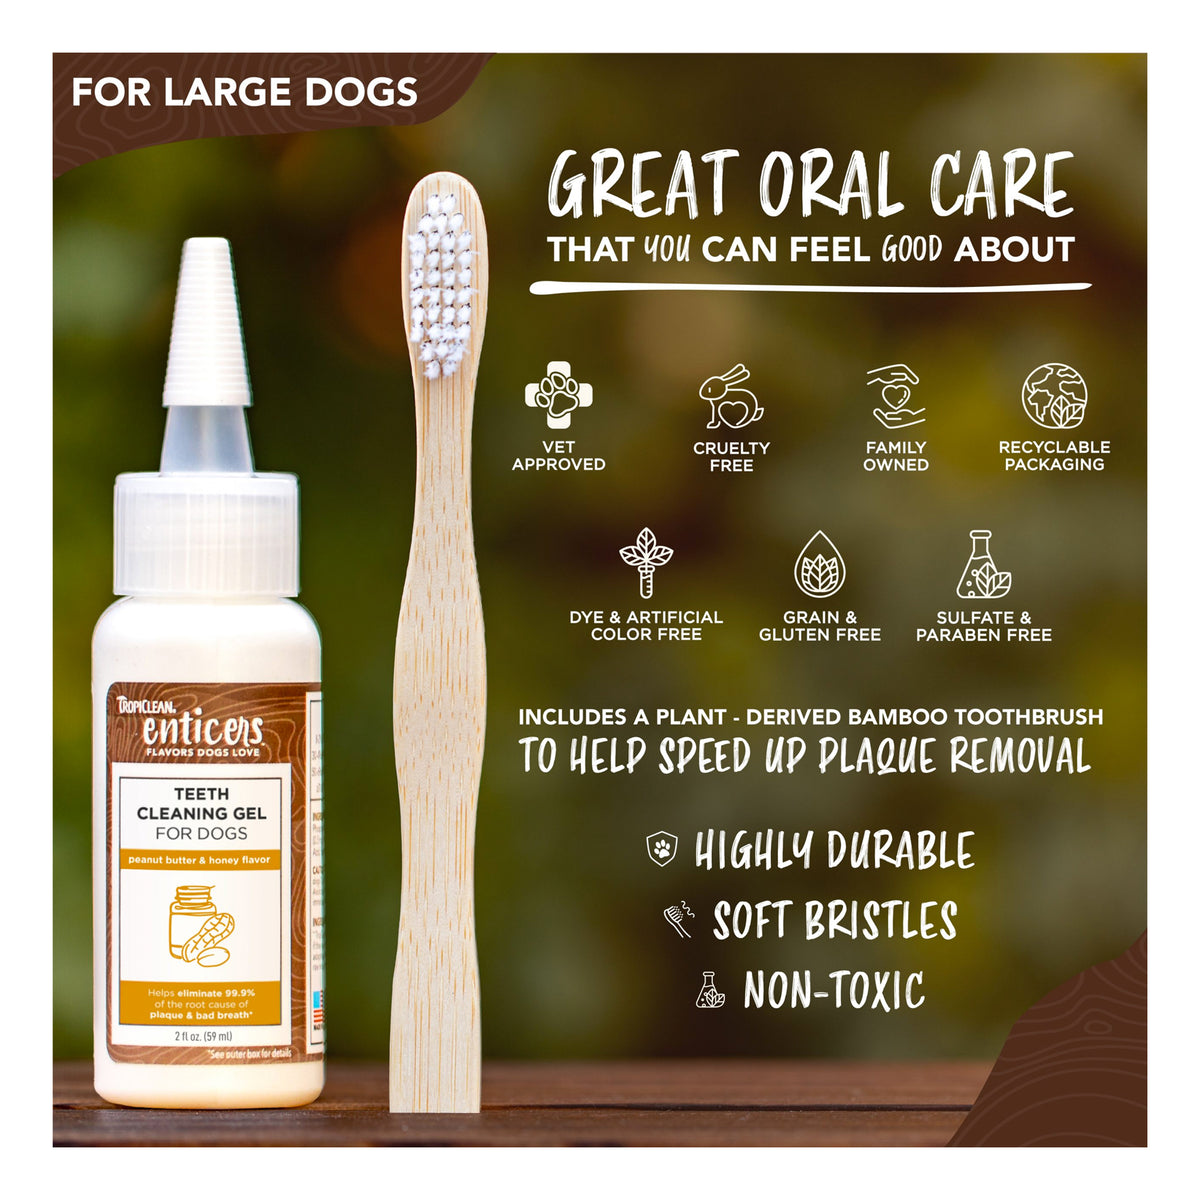 TropiClean Enticers Teeth Cleaning Gel &amp; Toothbrush for Dogs